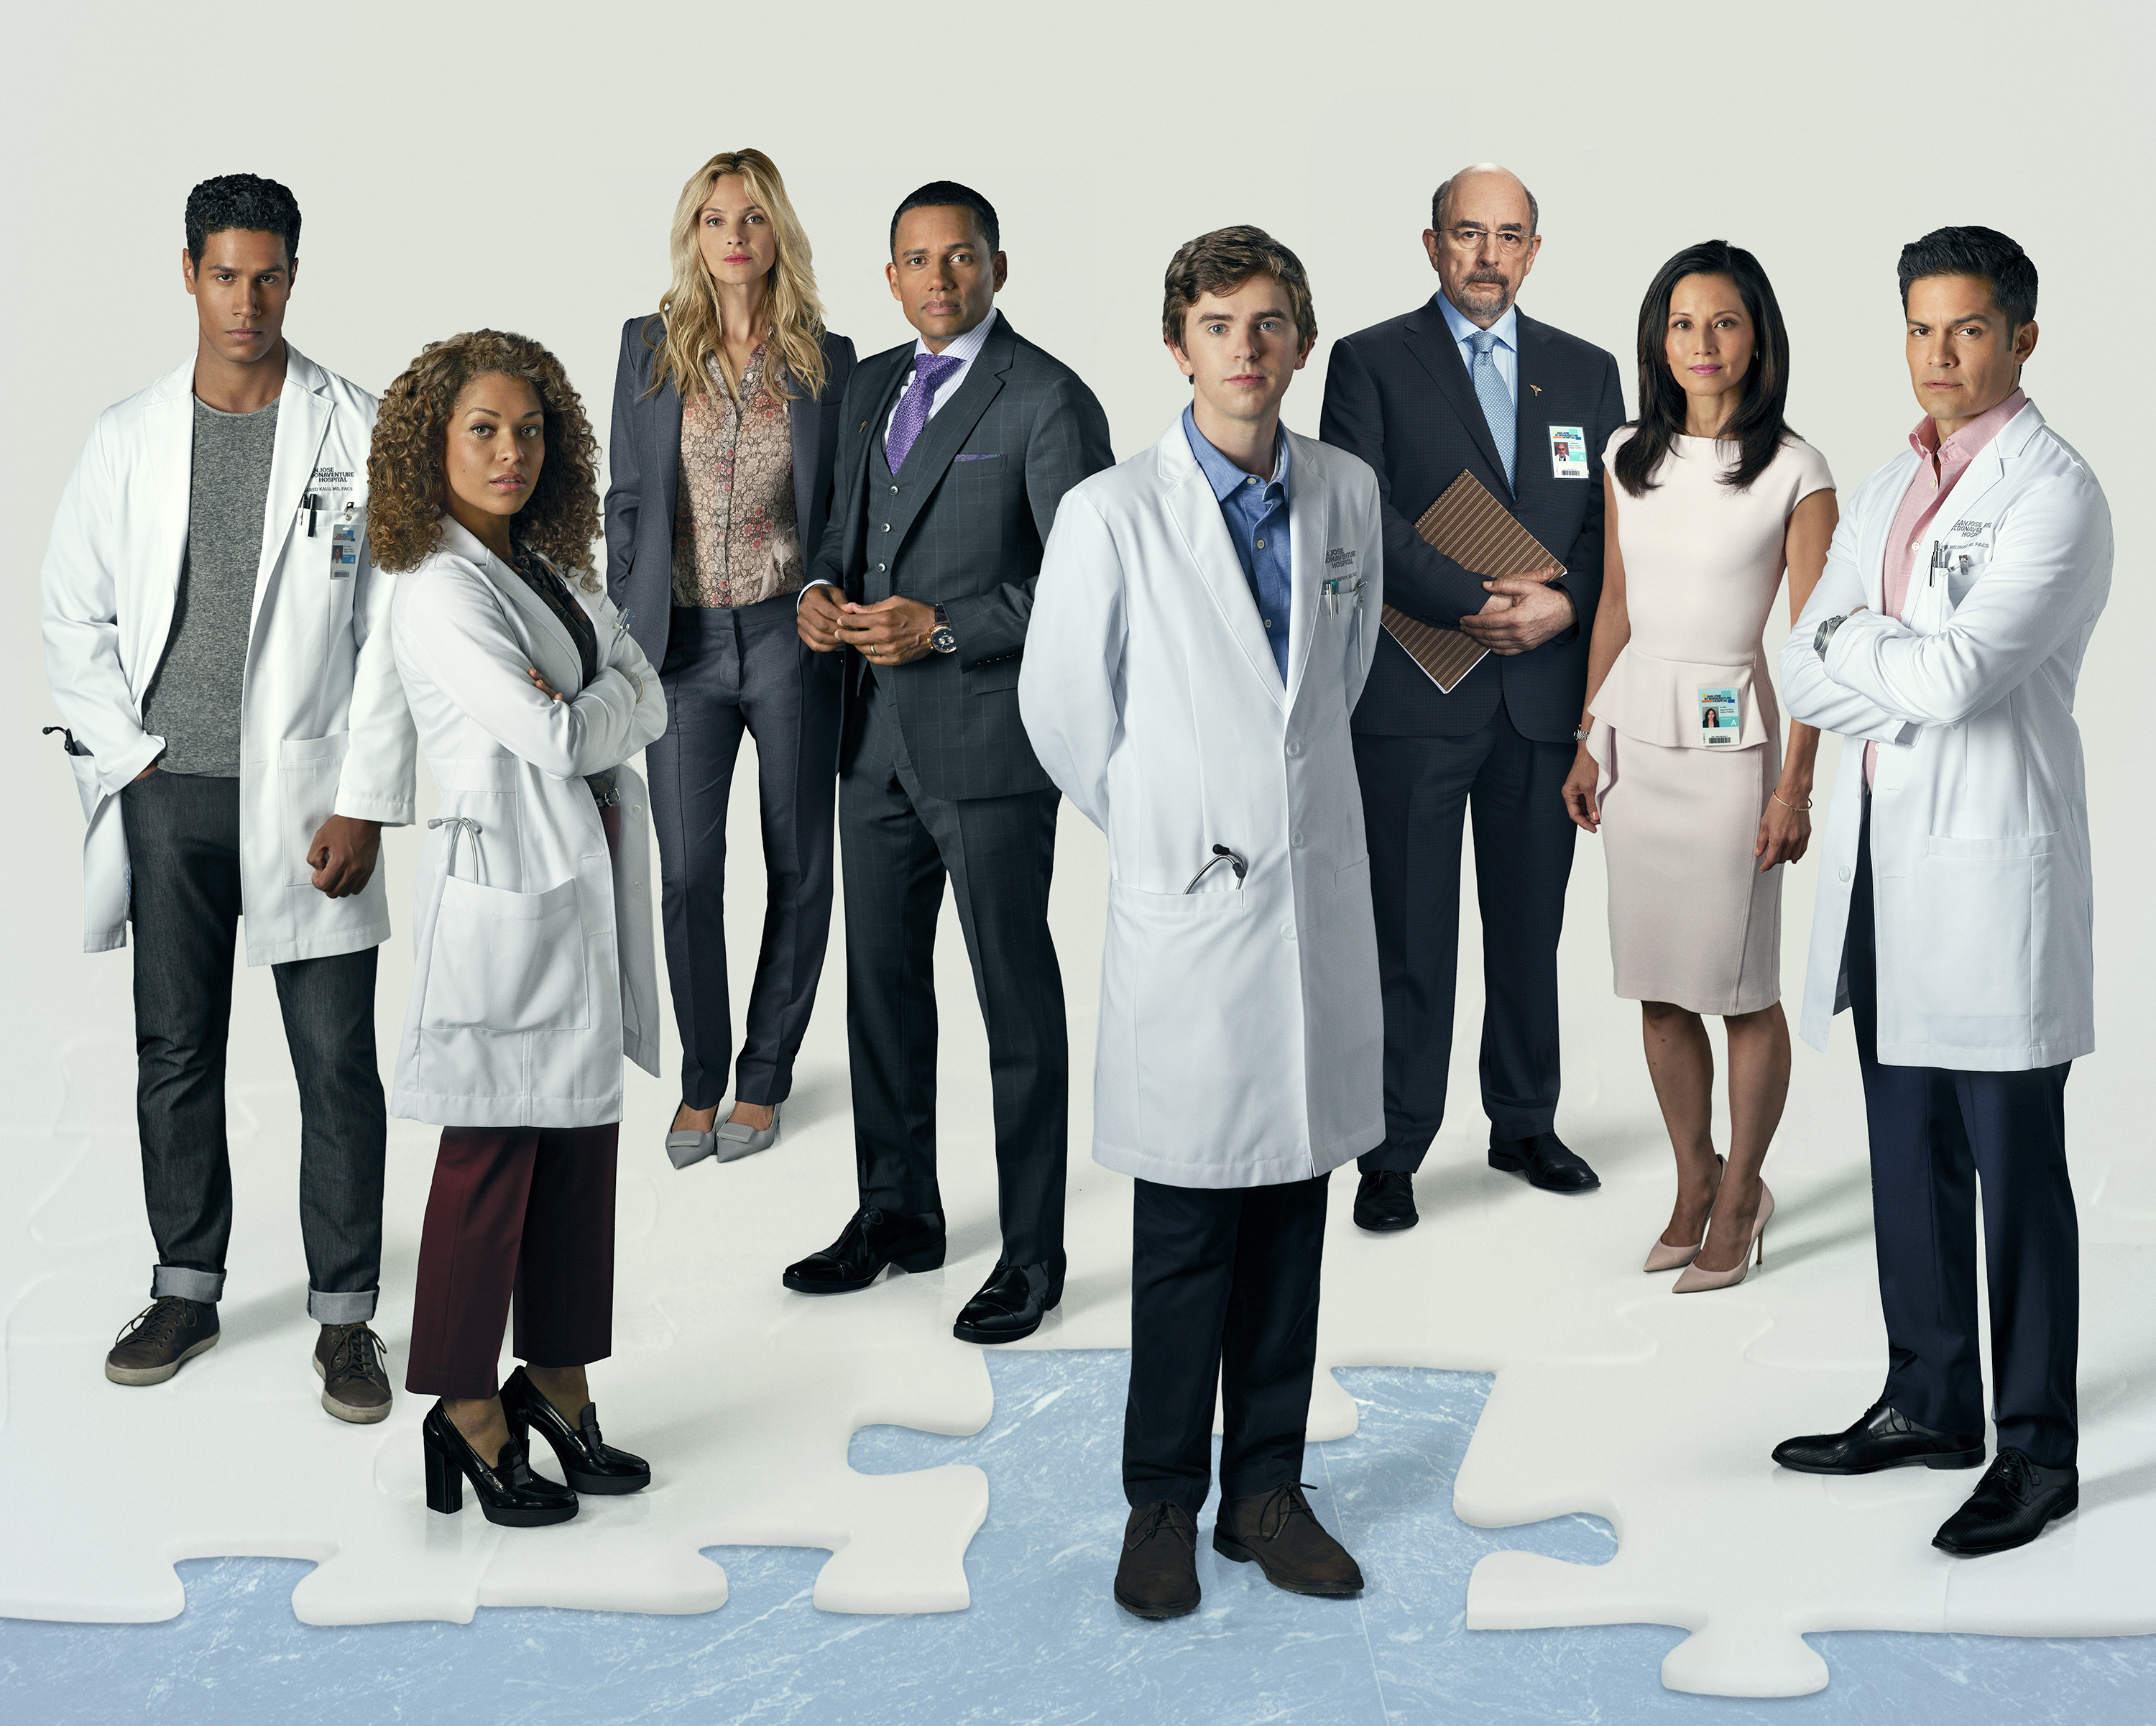 ABC Gives FullSeason Order to TV's No. 1 New Drama, The Good Doctor